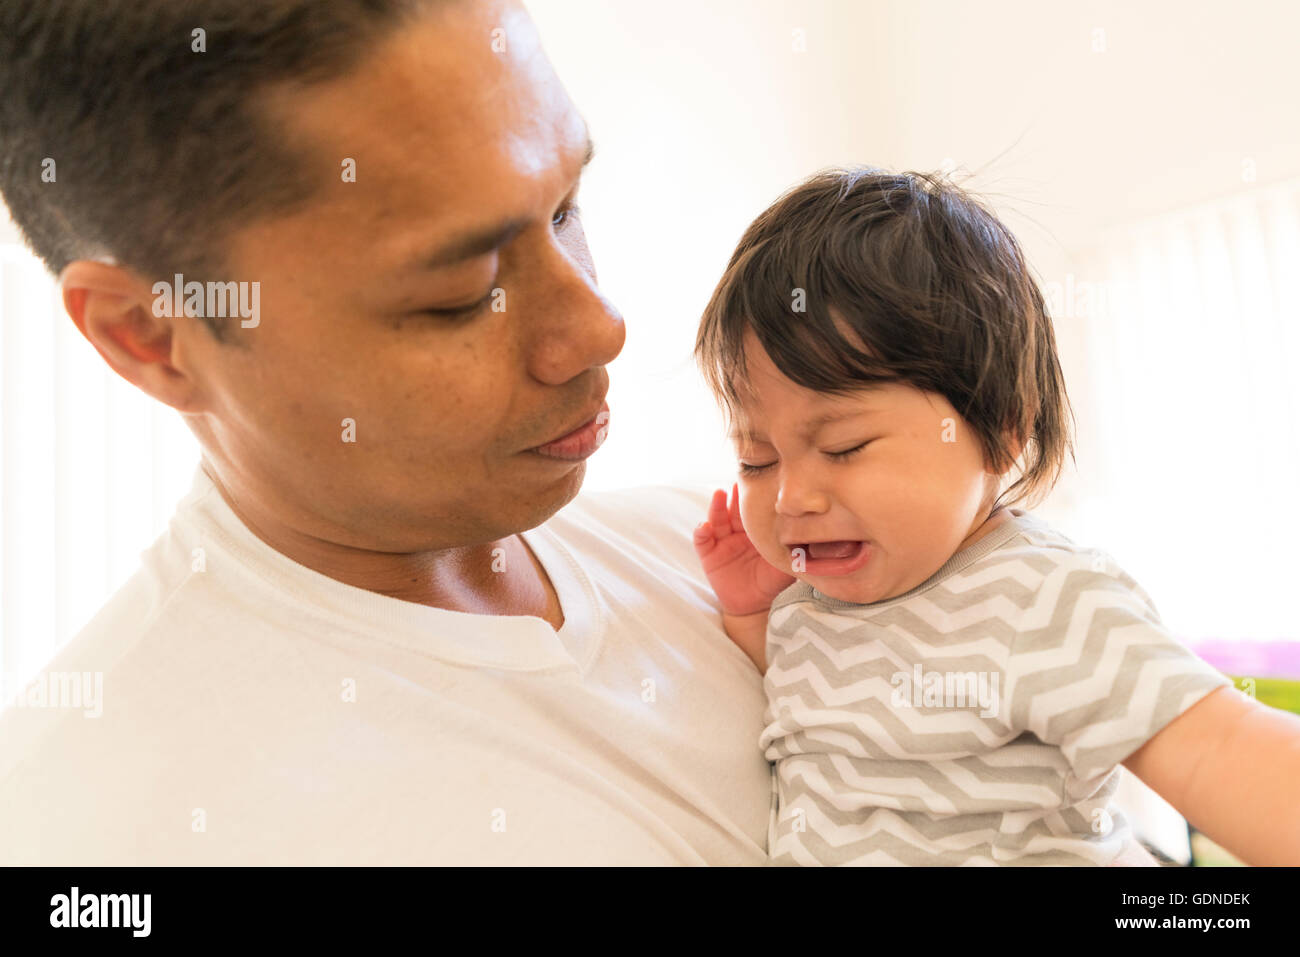 Father comforting crying baby Stock Photo